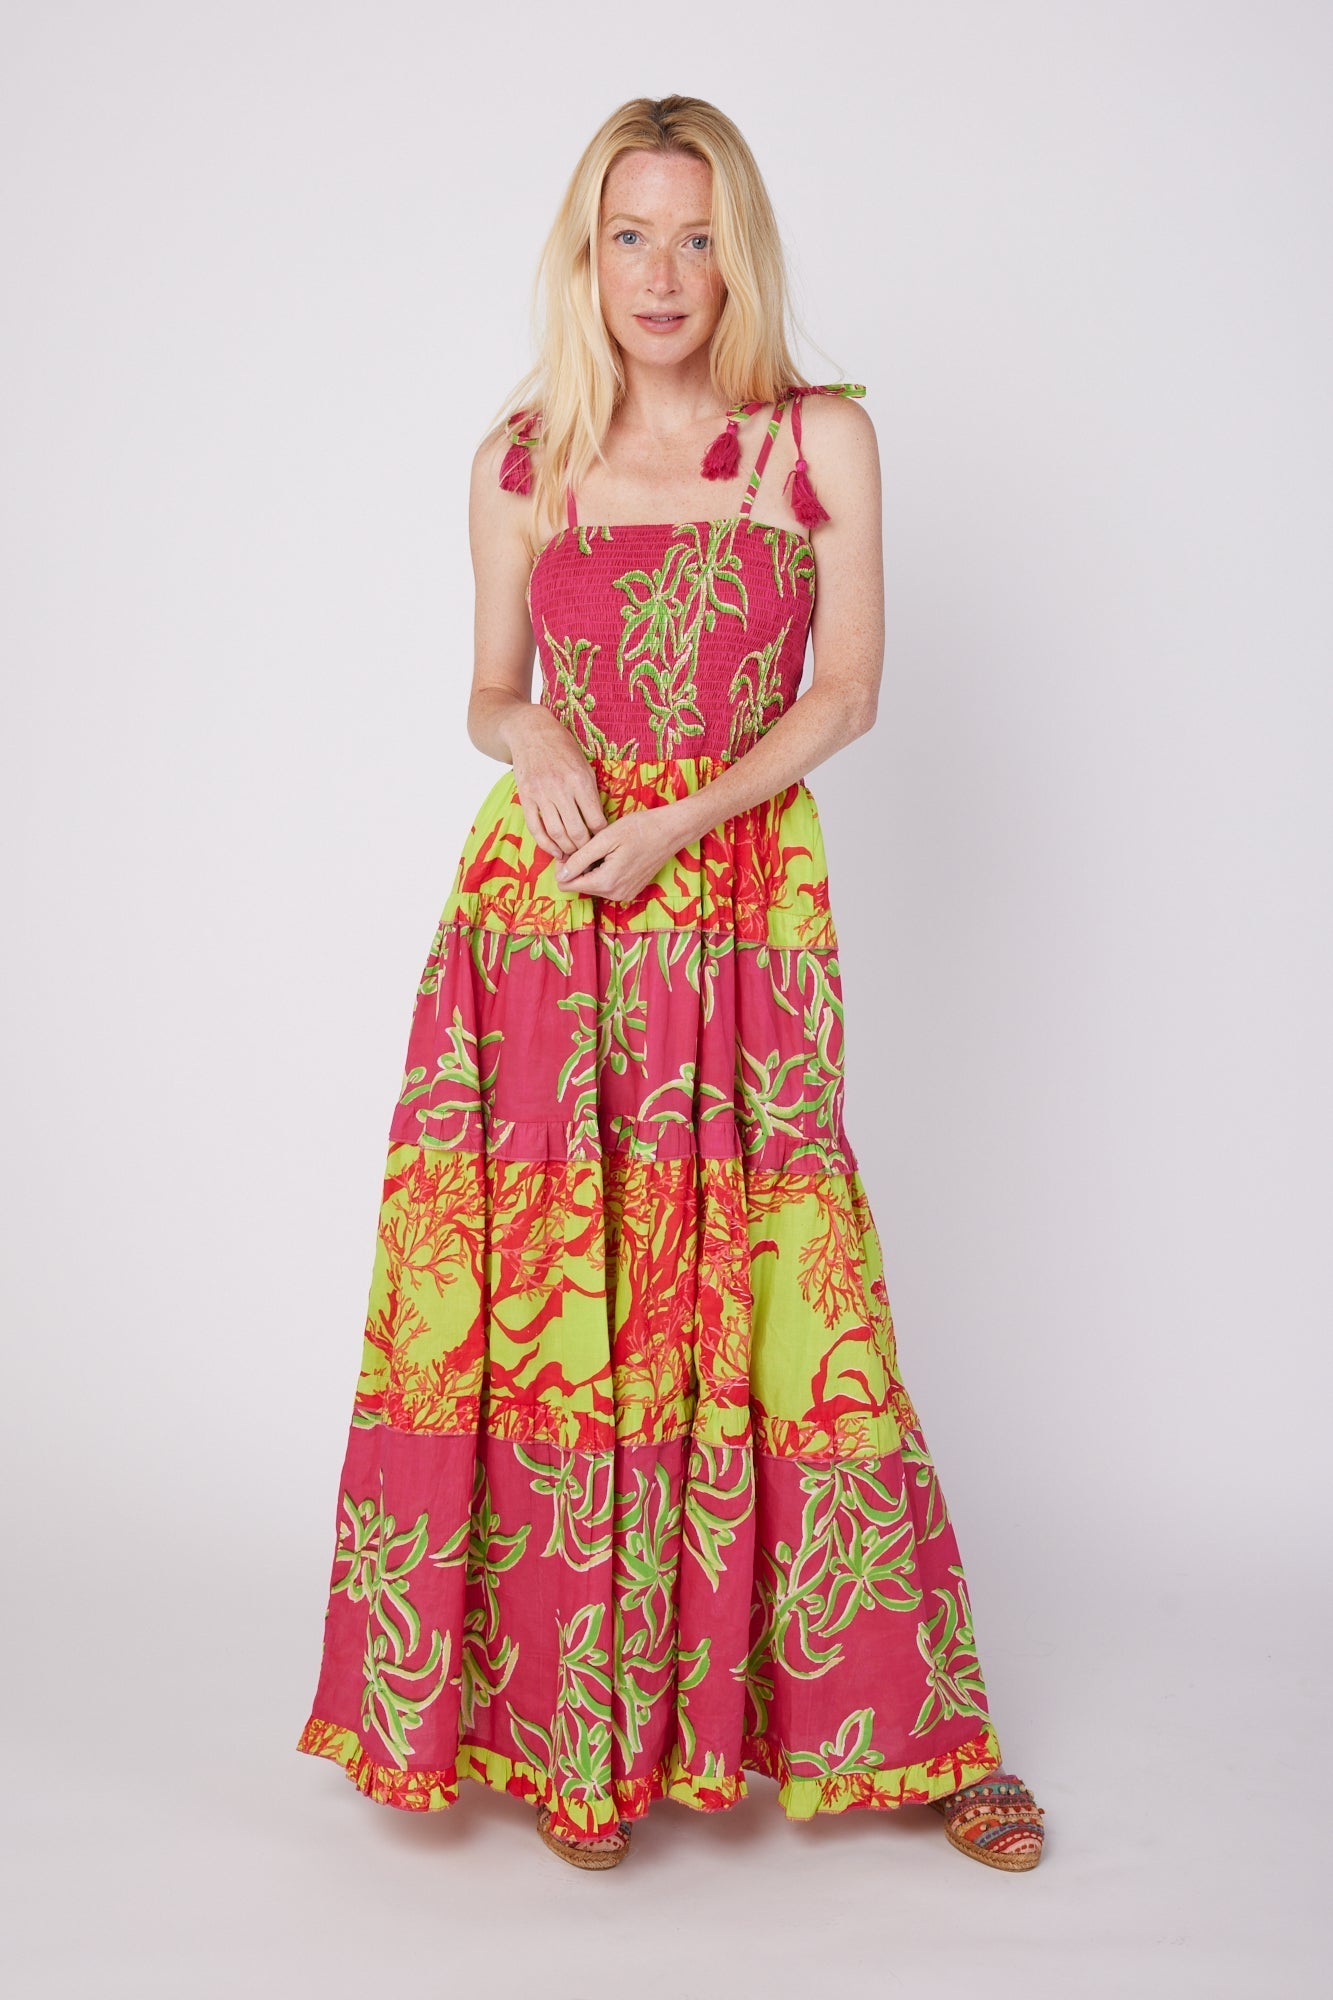 ModaPosa Dianora Spaghetti Strap Smocked Tiered Maxi Dress in Raspberry Lime Combo . Discover women's resort dresses and lifestyle clothing inspired by the Mediterranean. Free worldwide shipping available!